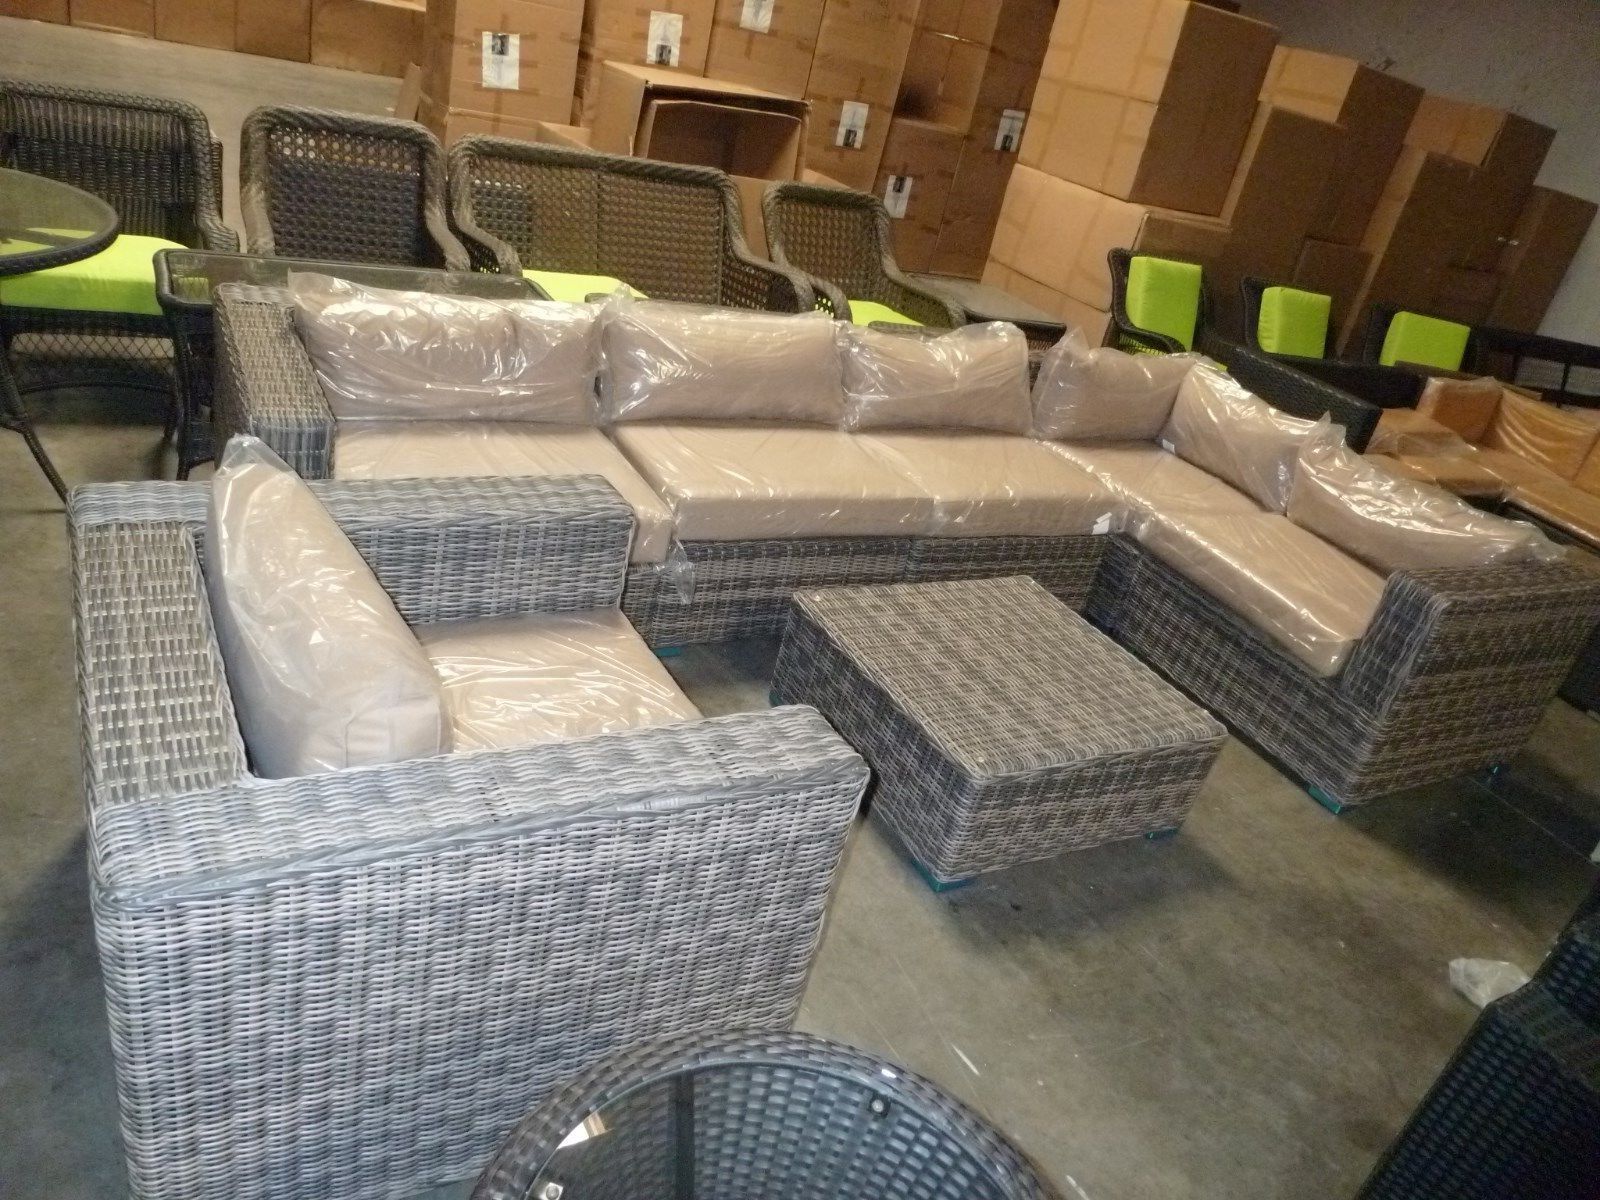 Distressed Wicker Patio Dining Set In Latest Distressed Outdoor Wicker Sectional Sofa Chair Coffee Table Patio (View 5 of 15)